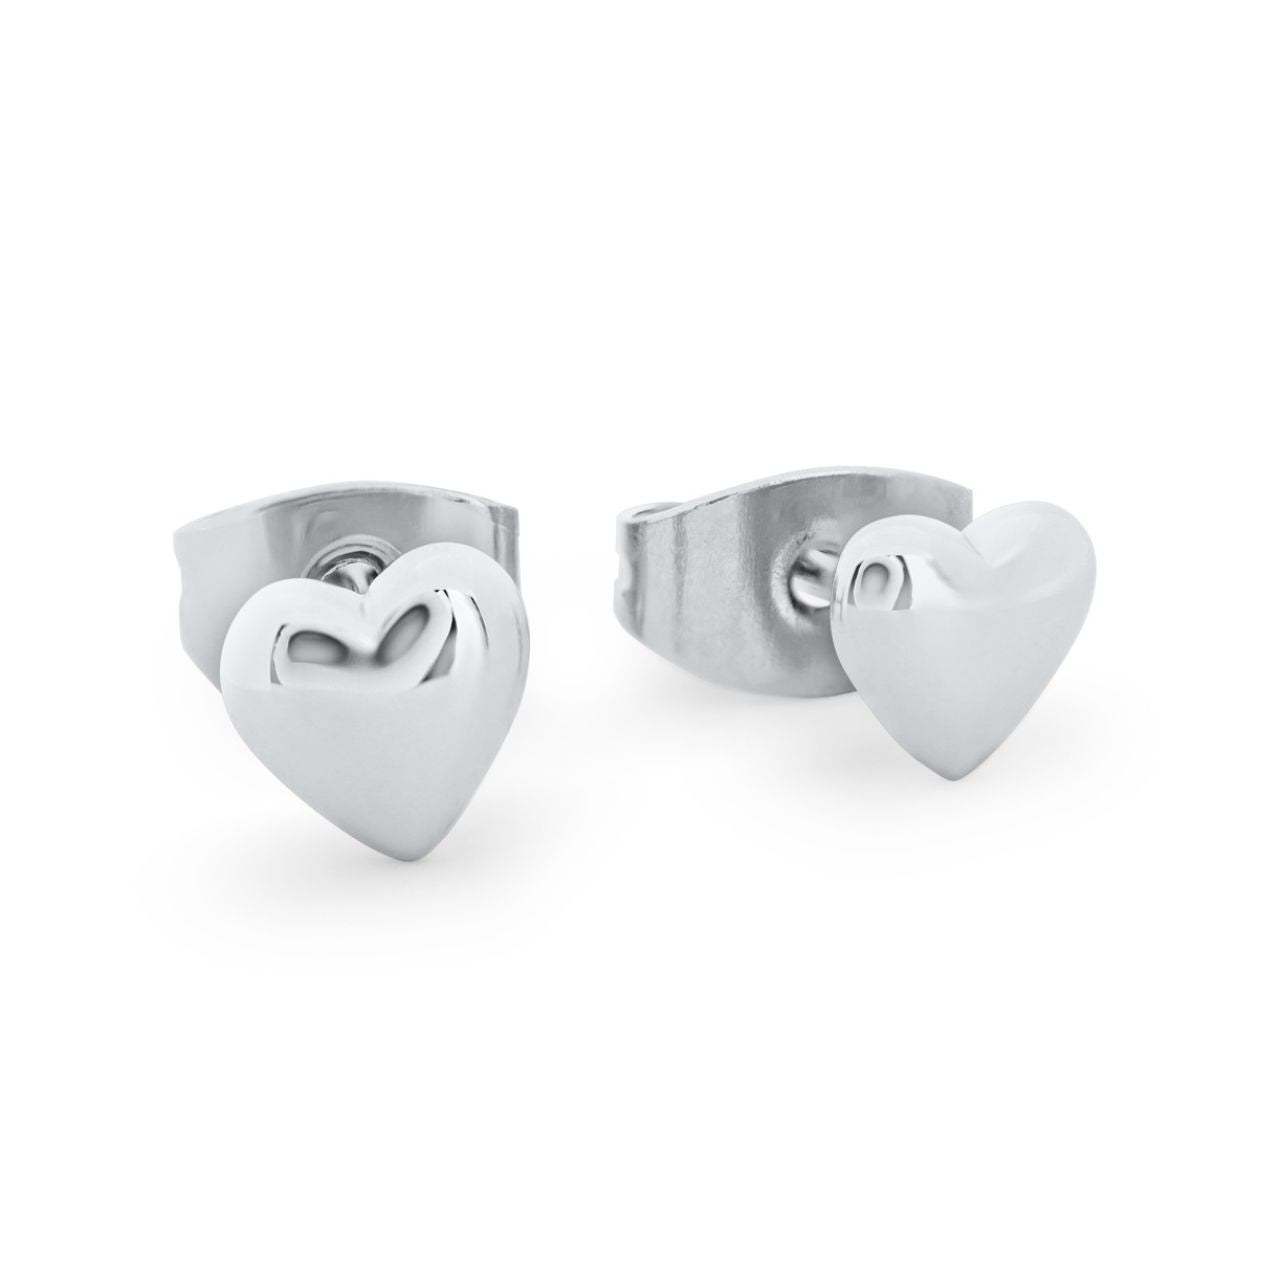 Tipperary Crystal Heart 8 mm Stud Earrings - Silver  A collection that is truely the ultimate expression of love, a wearable statement of the strength and fragility of the heart, a small shimmering reminder of love to cherish... forever!  Heart 8 mm Stud Earrings - Silver